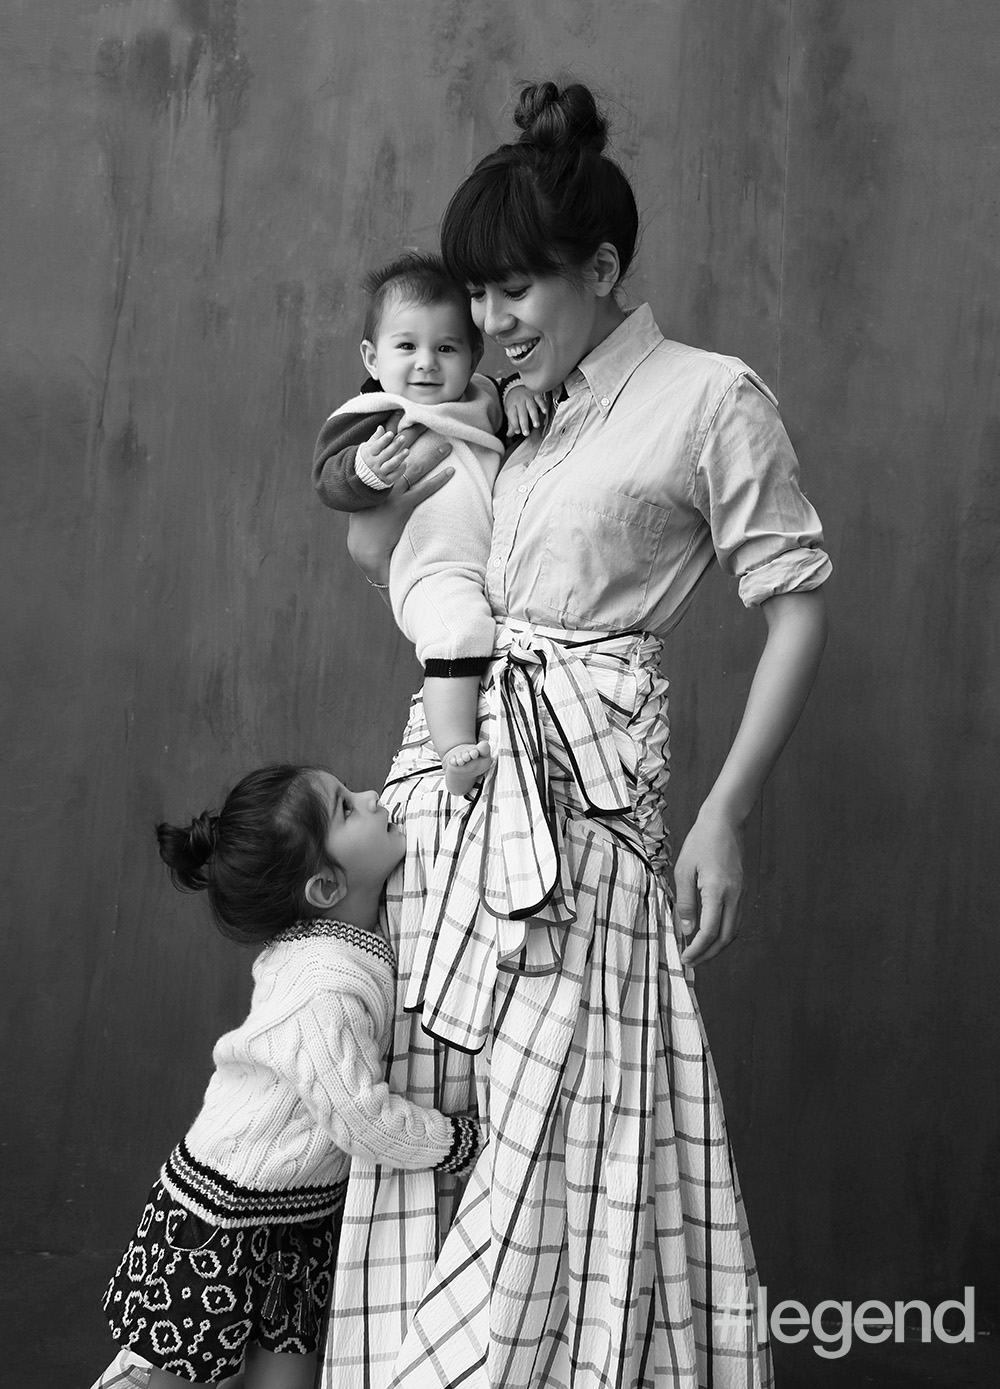 On Ingrid: Shirt by Them Browne and skirt by Rosie Assoulin from Joyce; On Hanaé: cashmere v-neck by Them Browne and shorts by Velveteen; On baby Kaïa: cashmere onesie by Them Browne